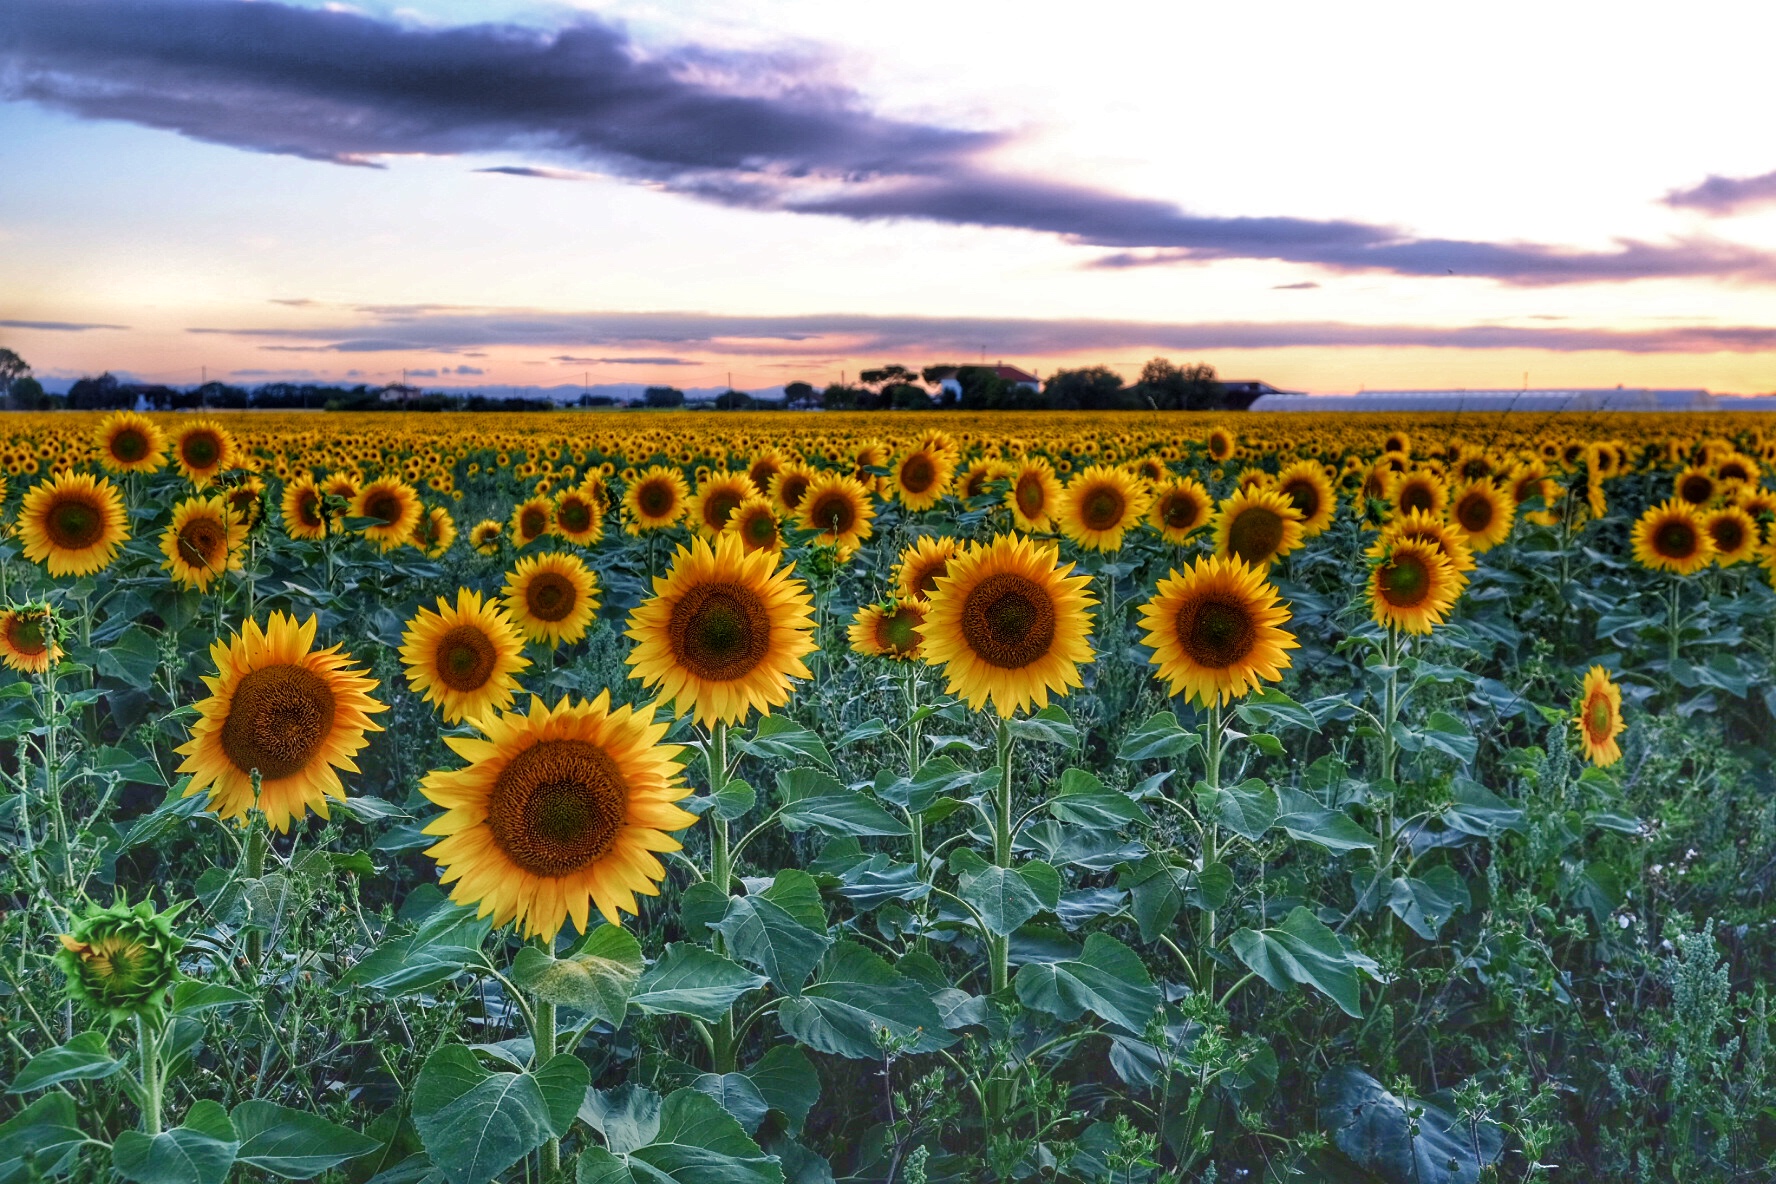 Countryside with sunflowers...